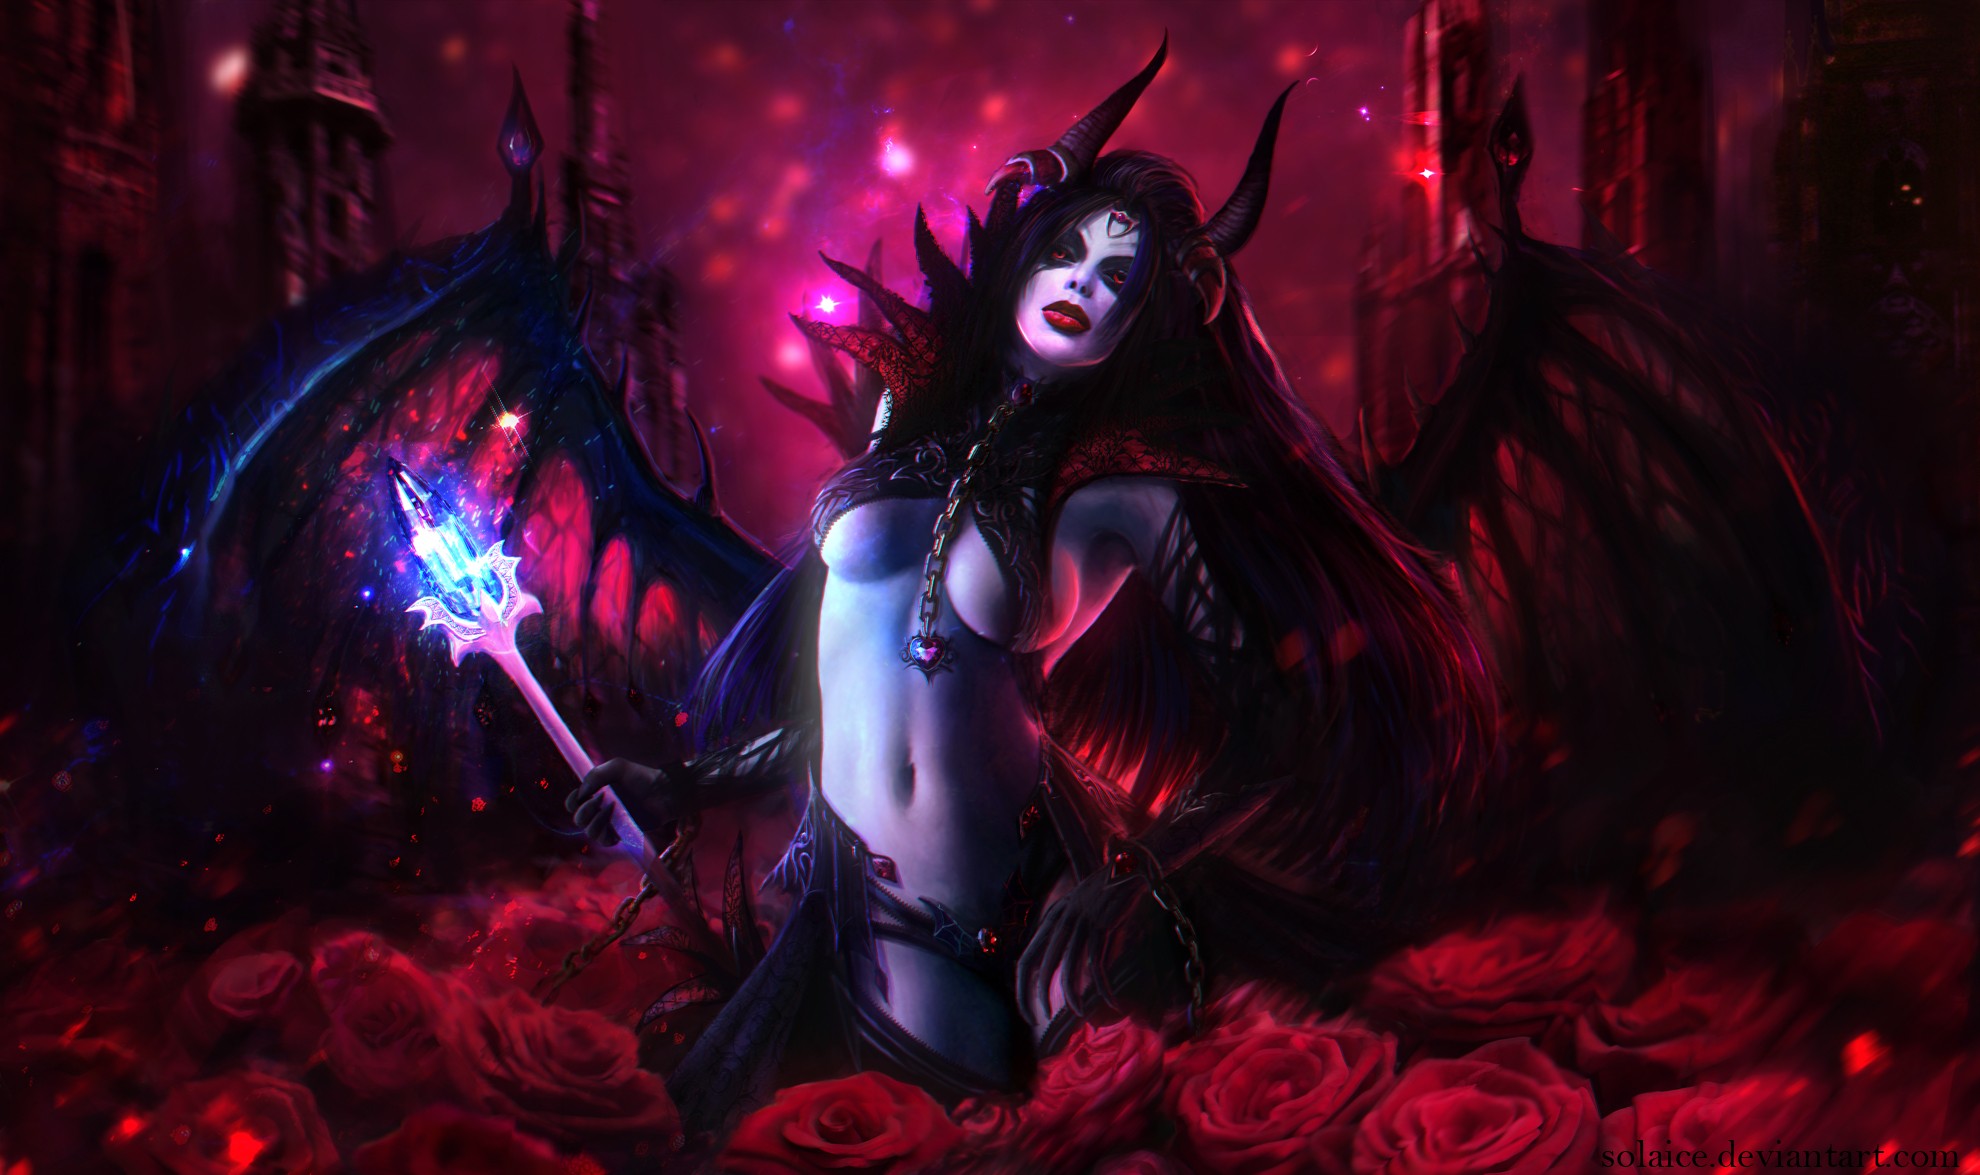 General 1980x1175 Dota 2 Queen of Pain PC gaming erotic art  fantasy art fantasy girl video game art video game girls succubus horns red eyes red lipstick boobs big boobs belly wings DeviantArt